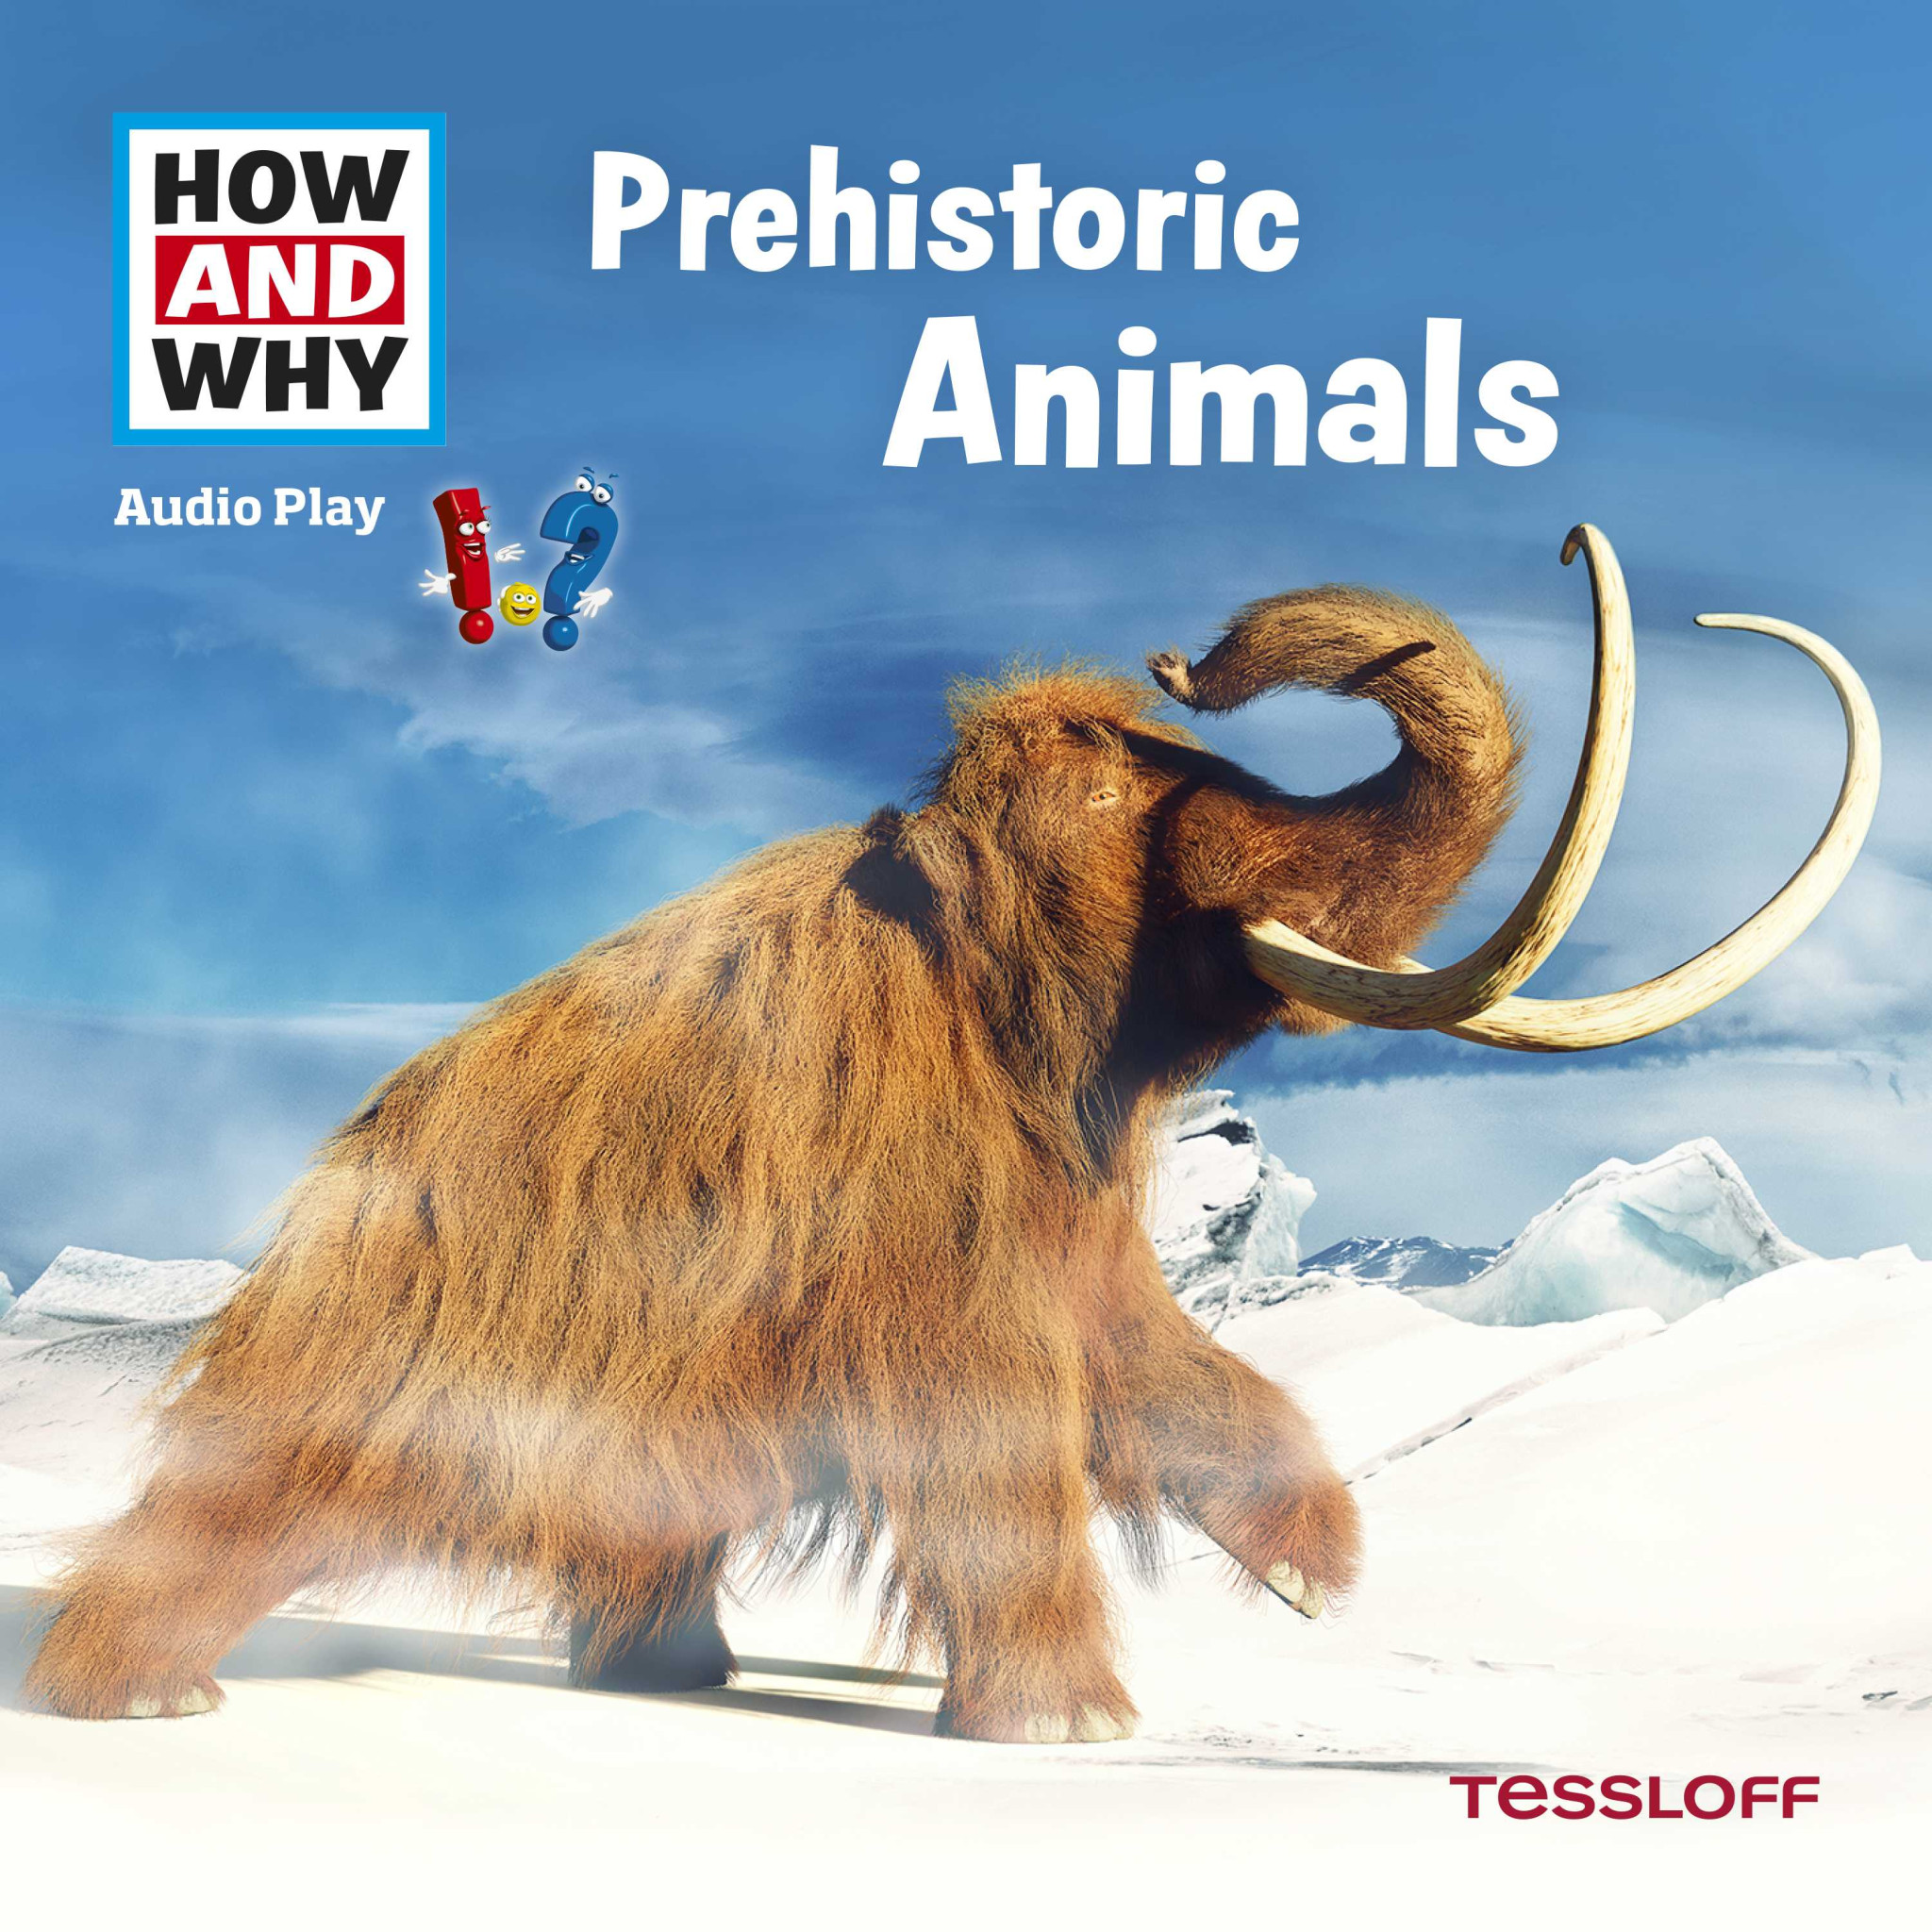 HOW AND WHY Prehistoric Animals